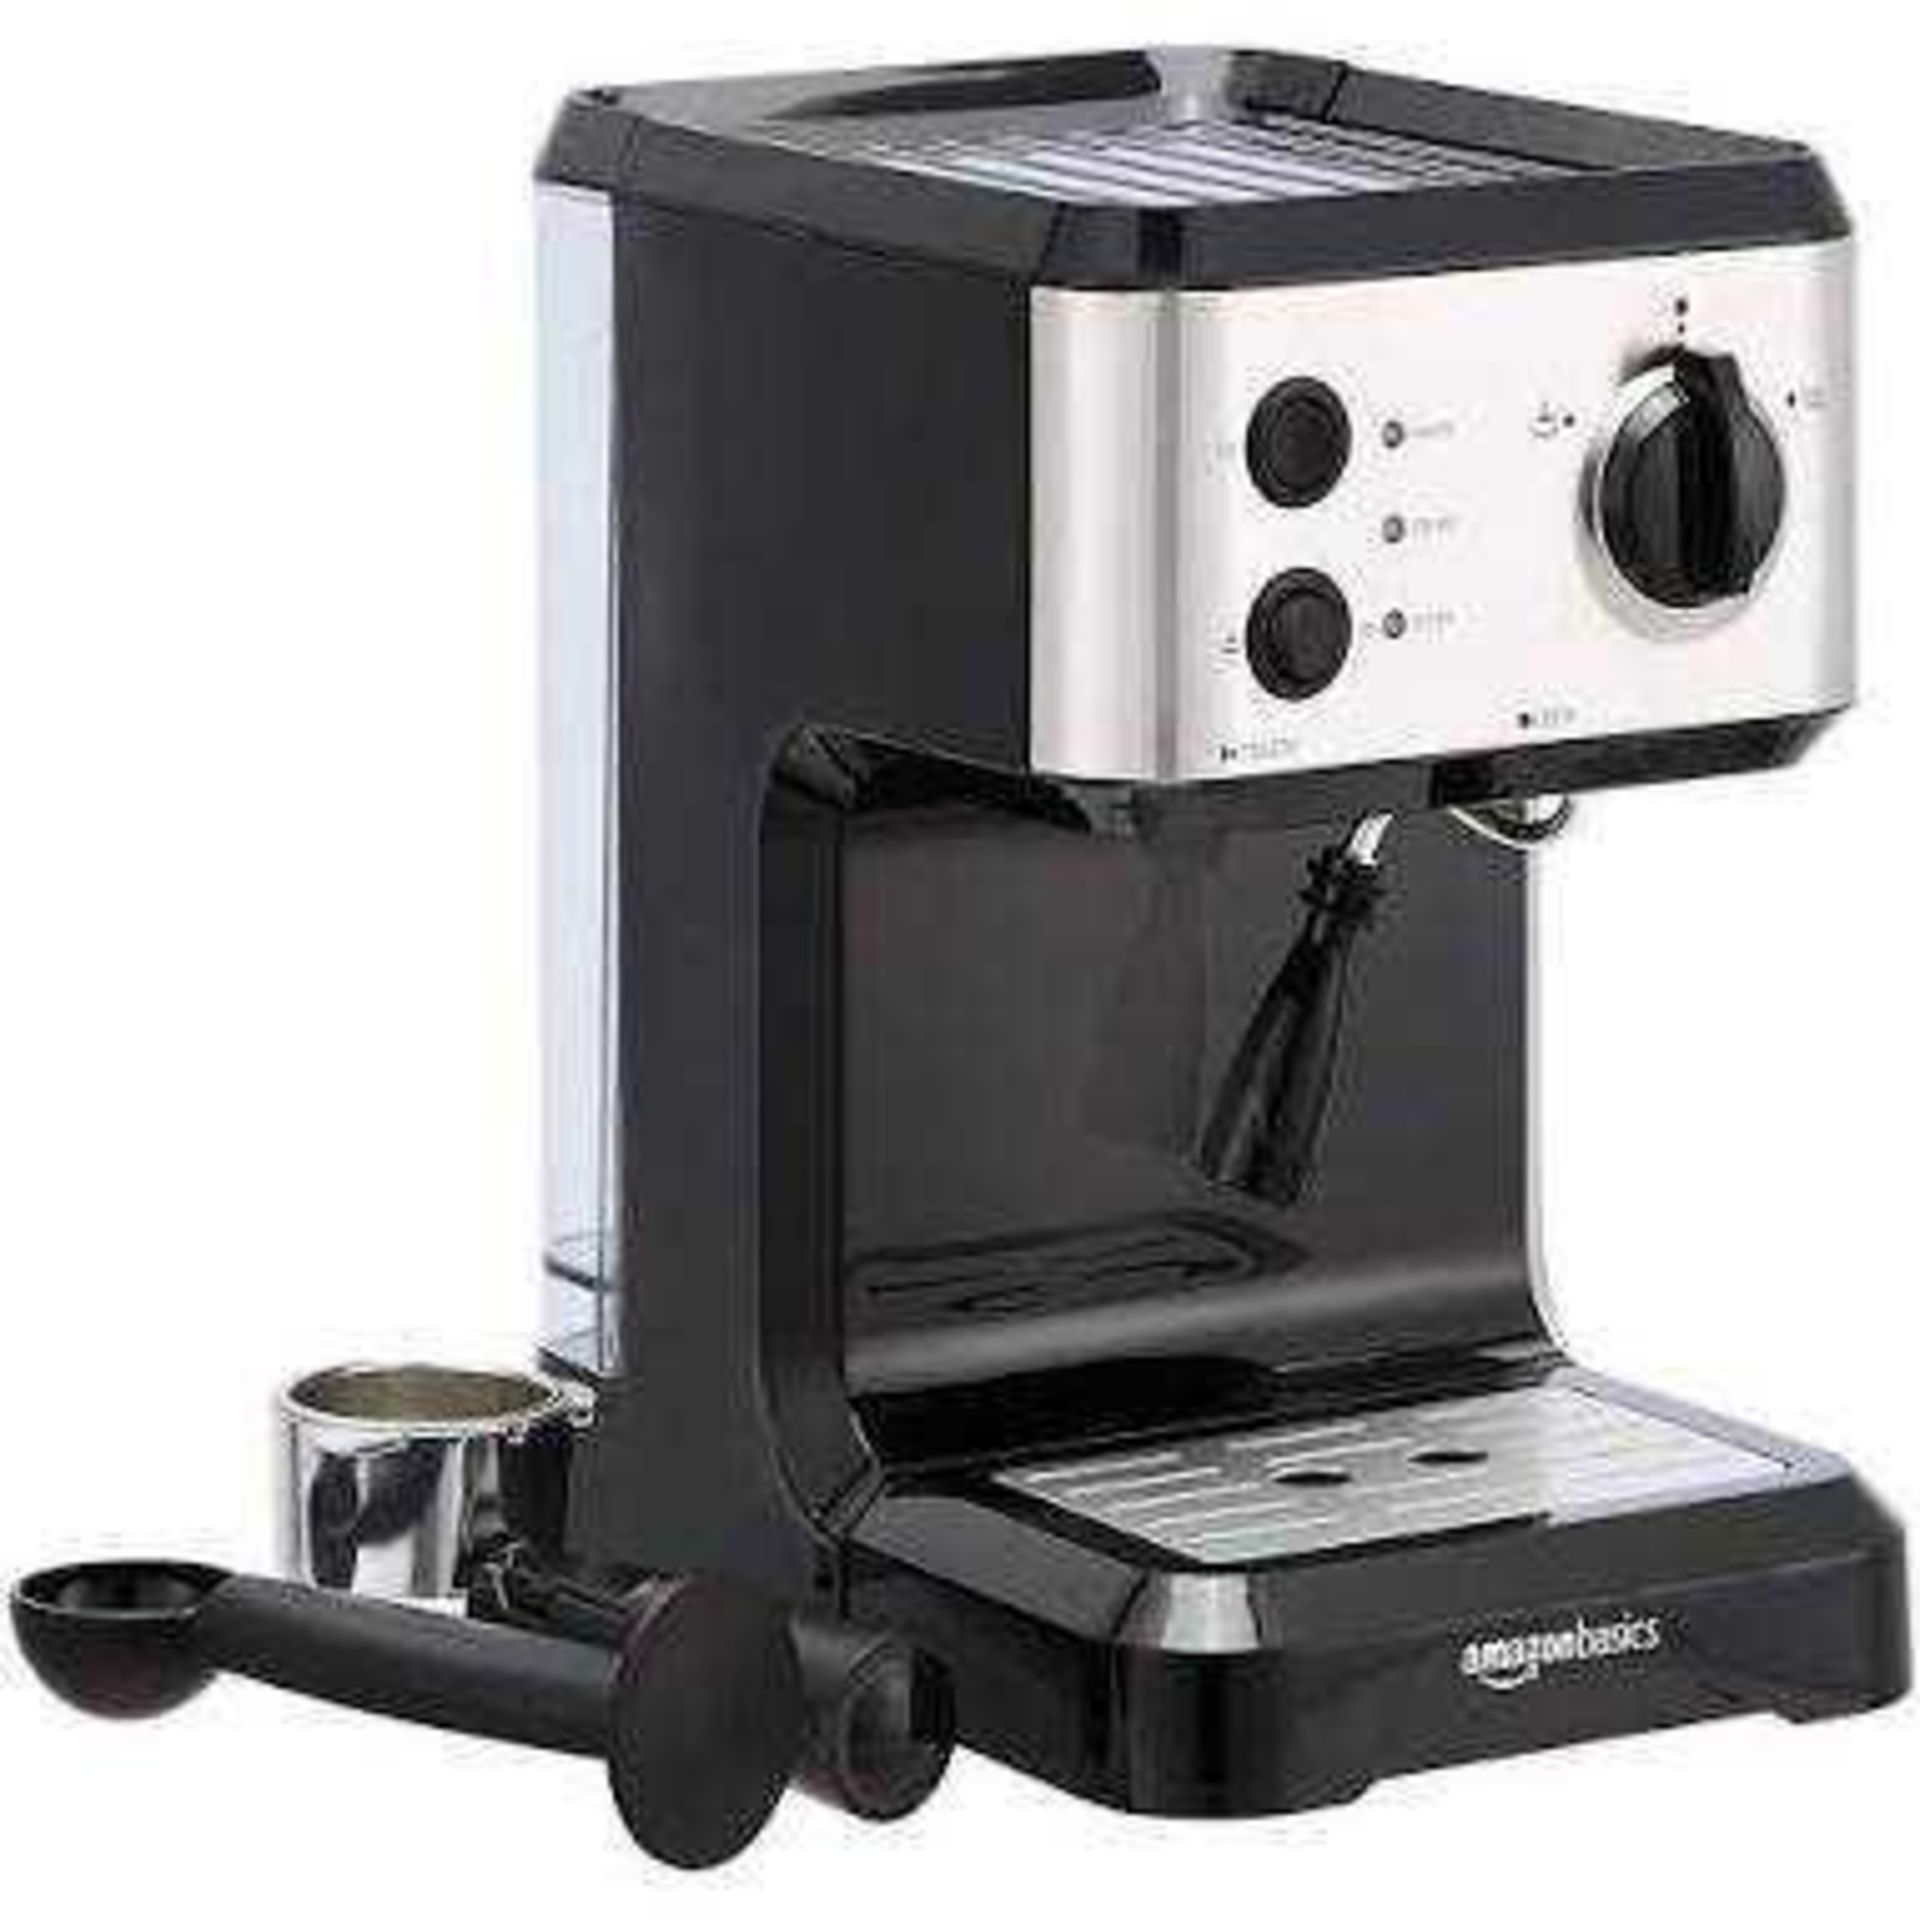 RRP £200 Lot To Contain 2 Boxed Brand New Amazon Basics Espresso Coffee Machine With Milk Frother (